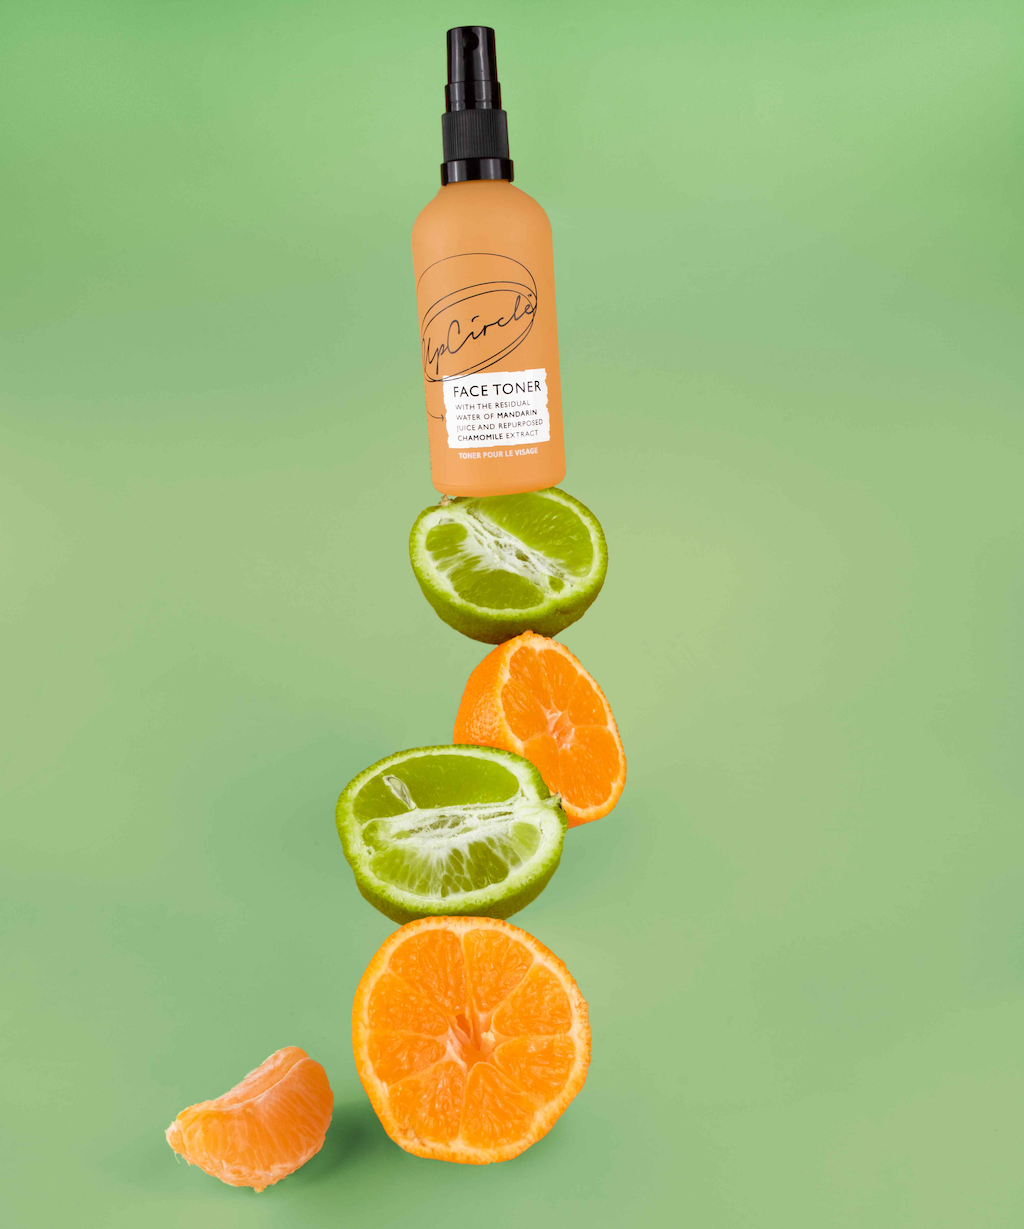 upcircle face toner bottle on a minty green background is balancing on a stack of orange and lime segments